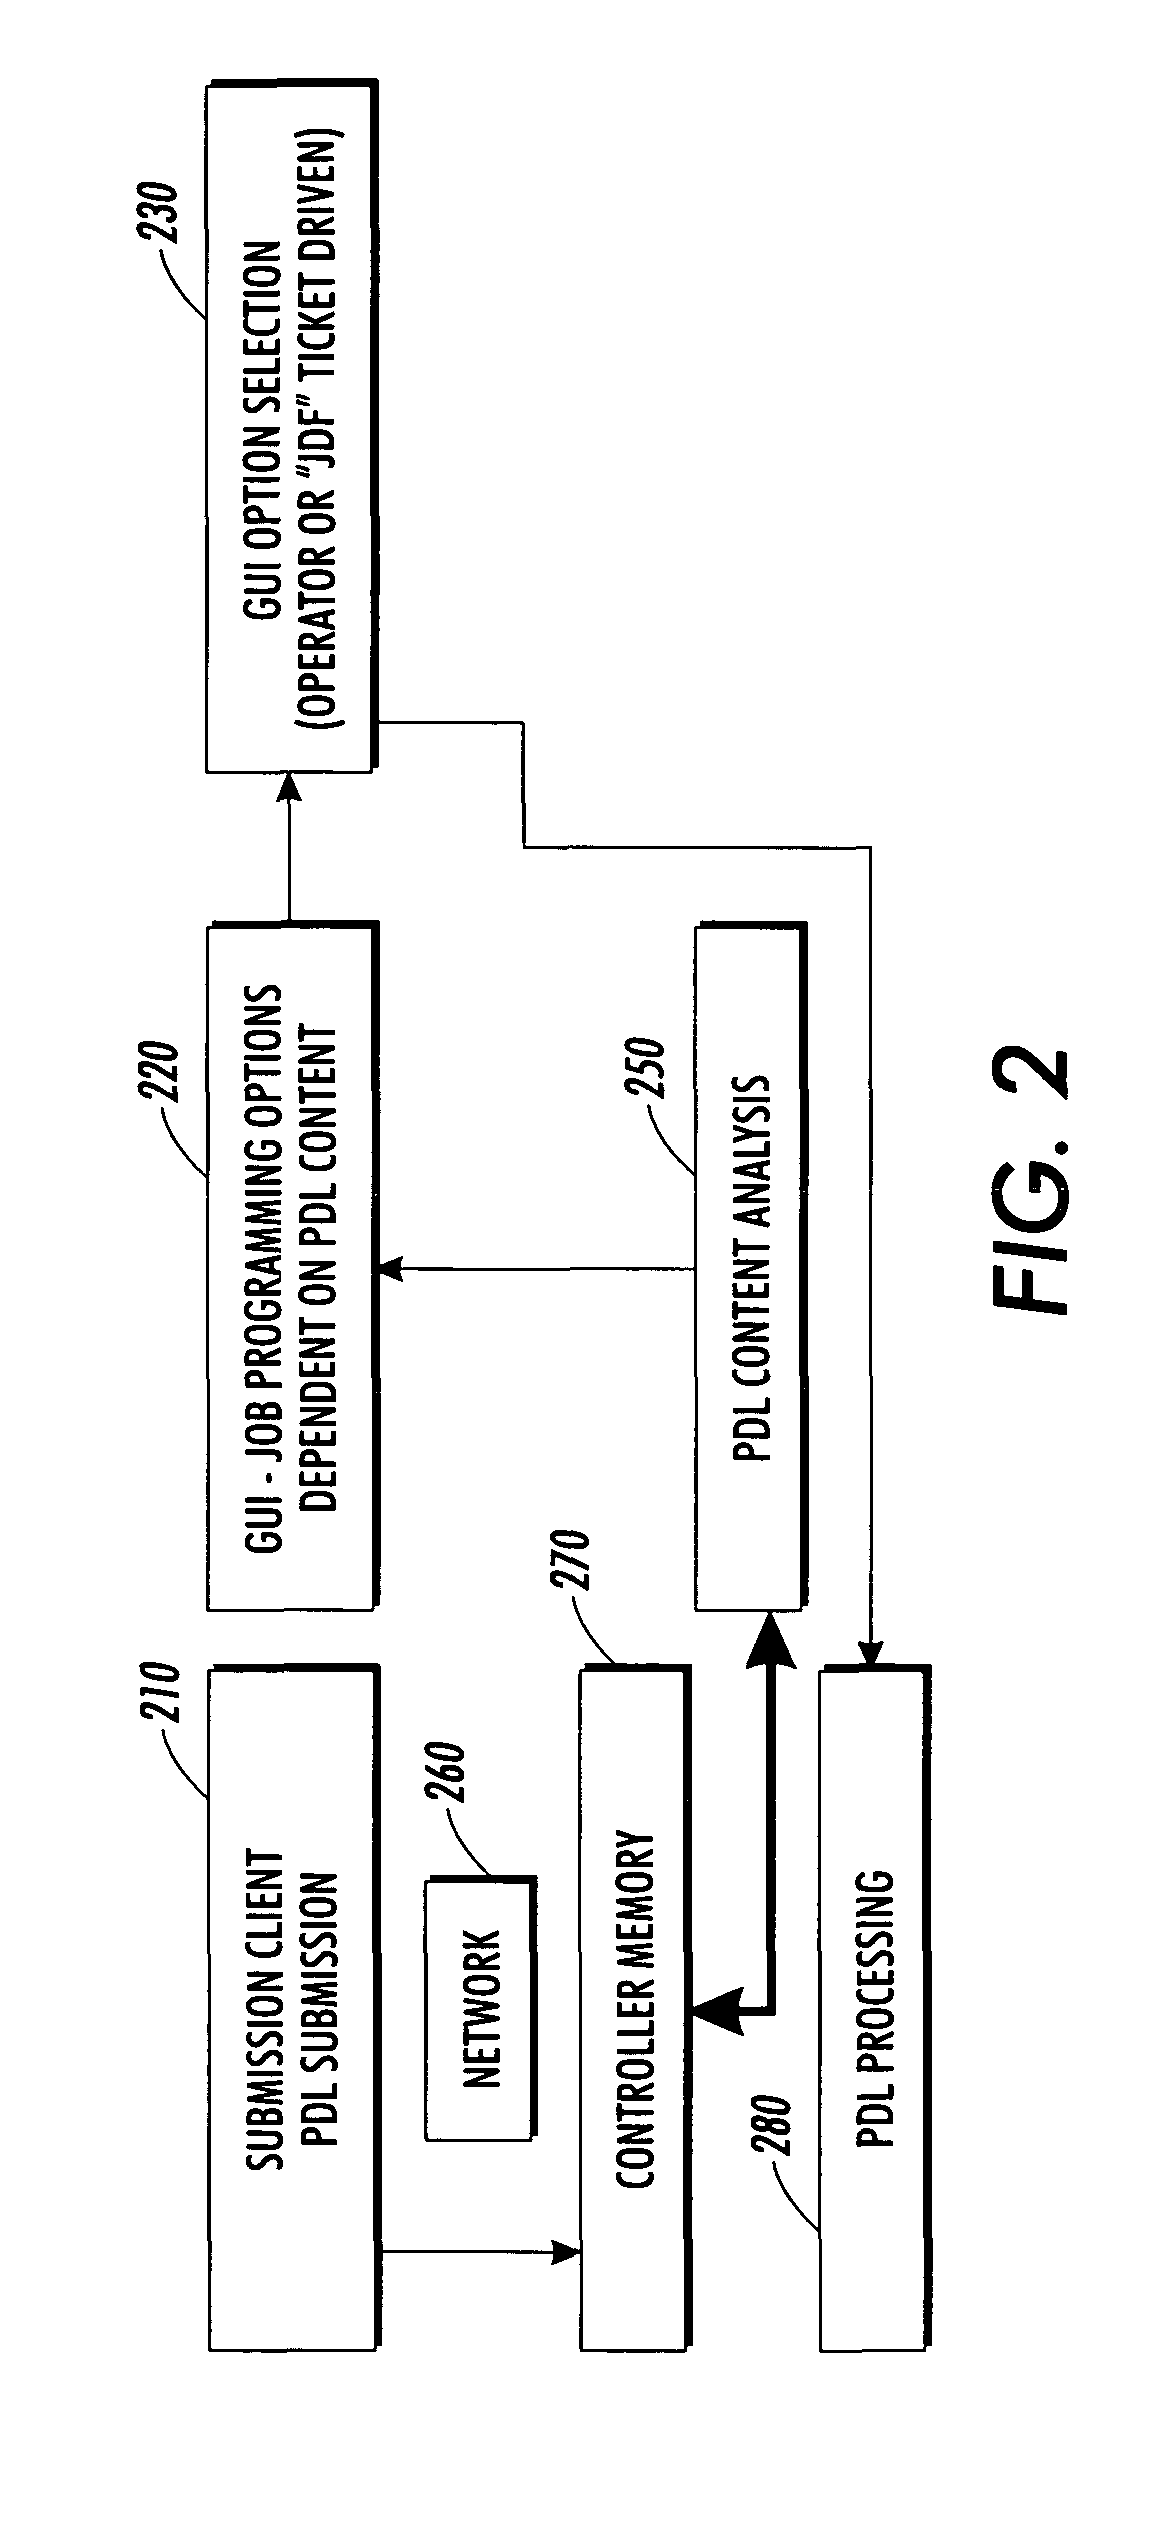 Electronic format file content sensitive user interface